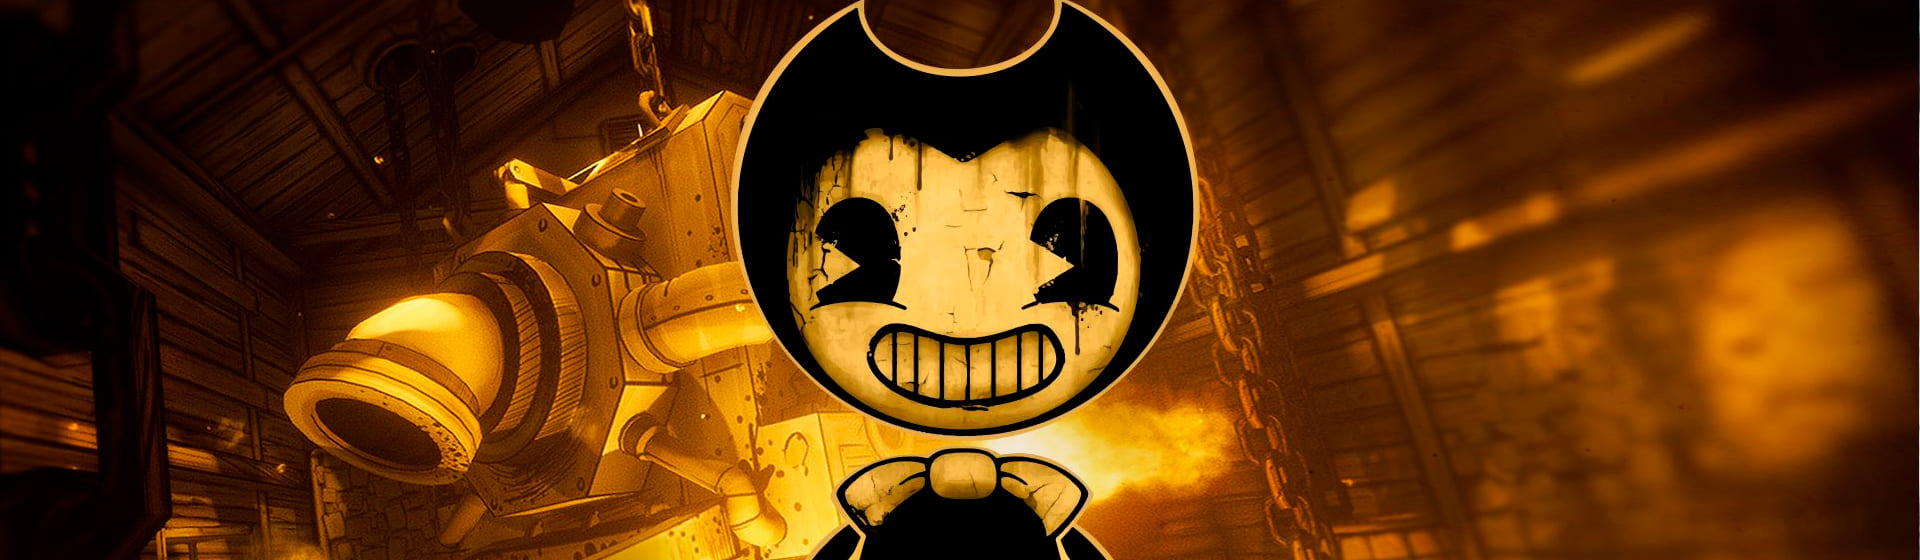 Bendy And the ink machine - Пижамы